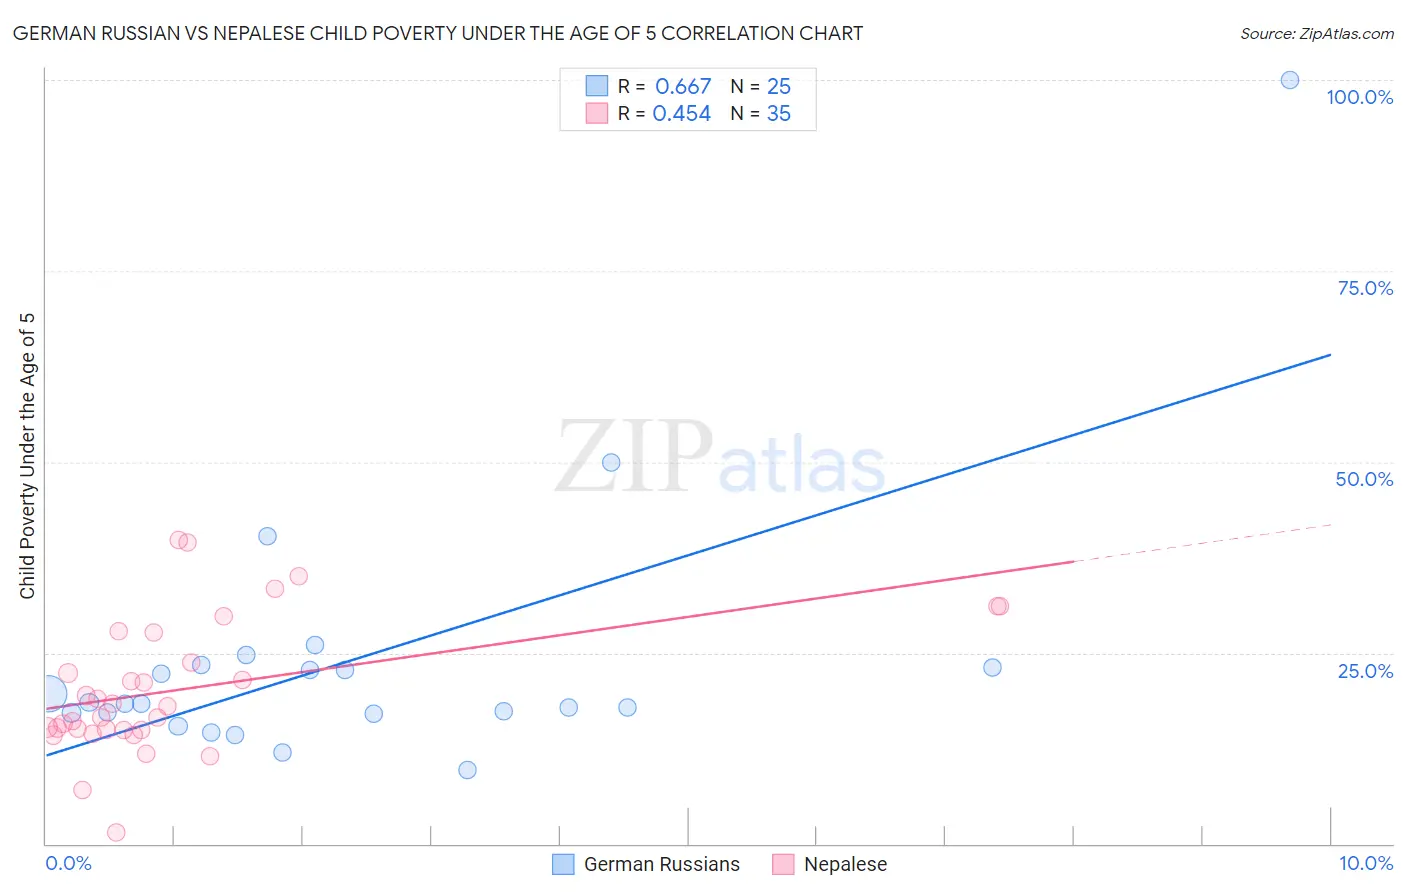 German Russian vs Nepalese Child Poverty Under the Age of 5